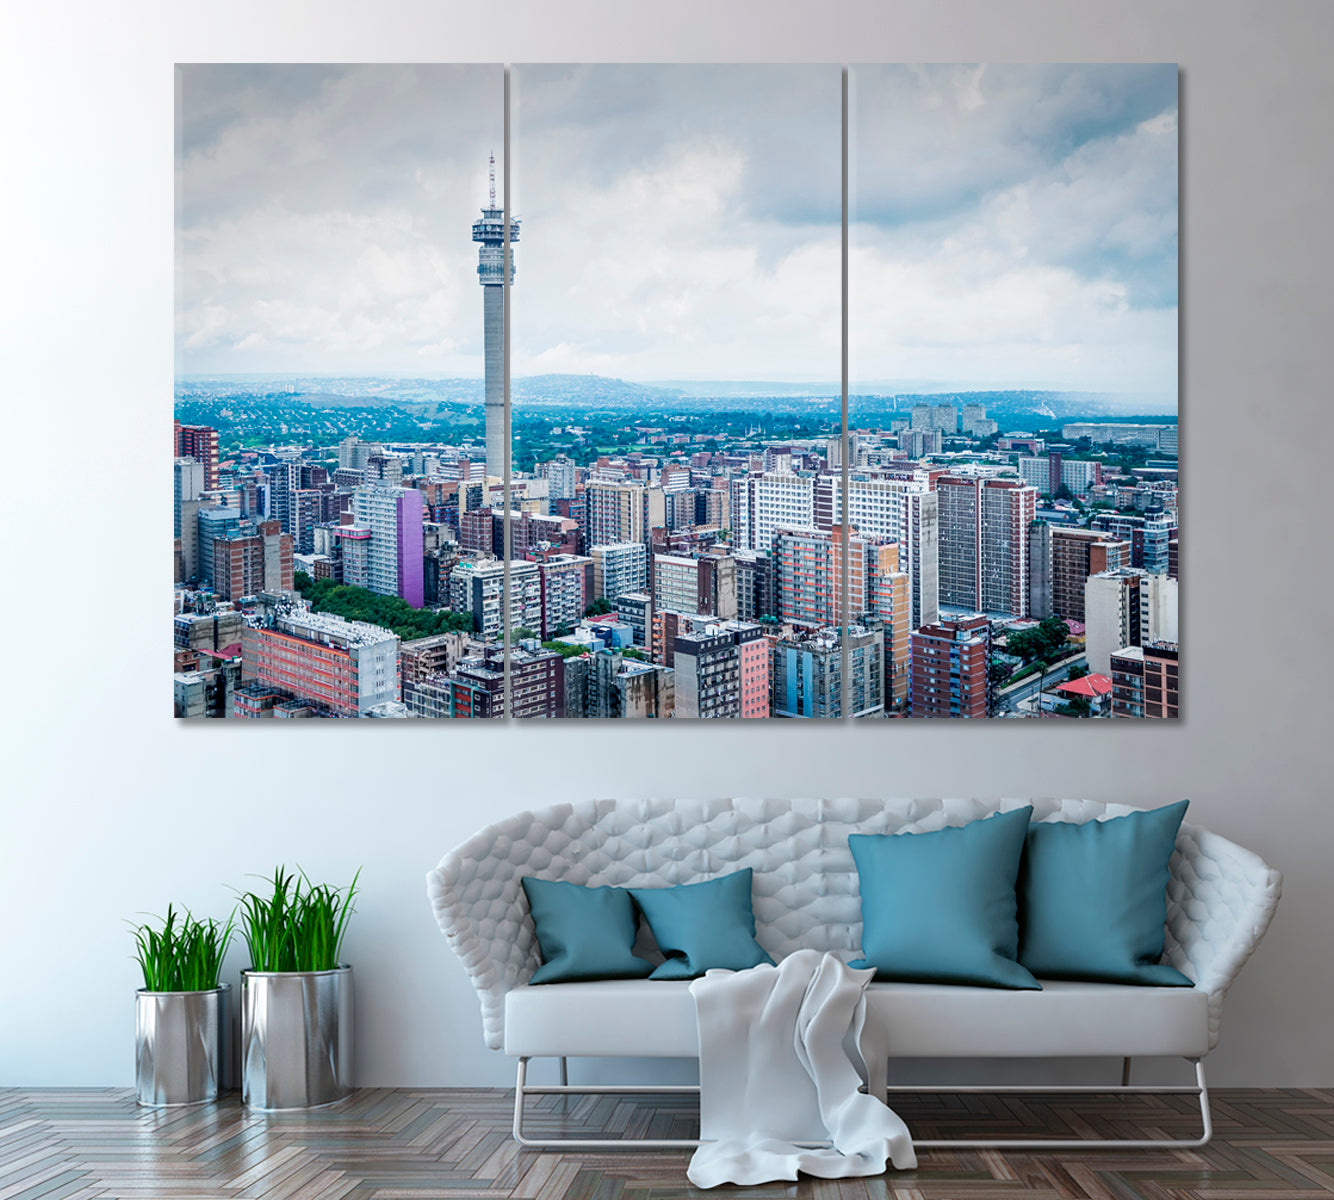 Johannesburg South Africa Canvas Print ArtLexy 3 Panels 36"x24" inches 